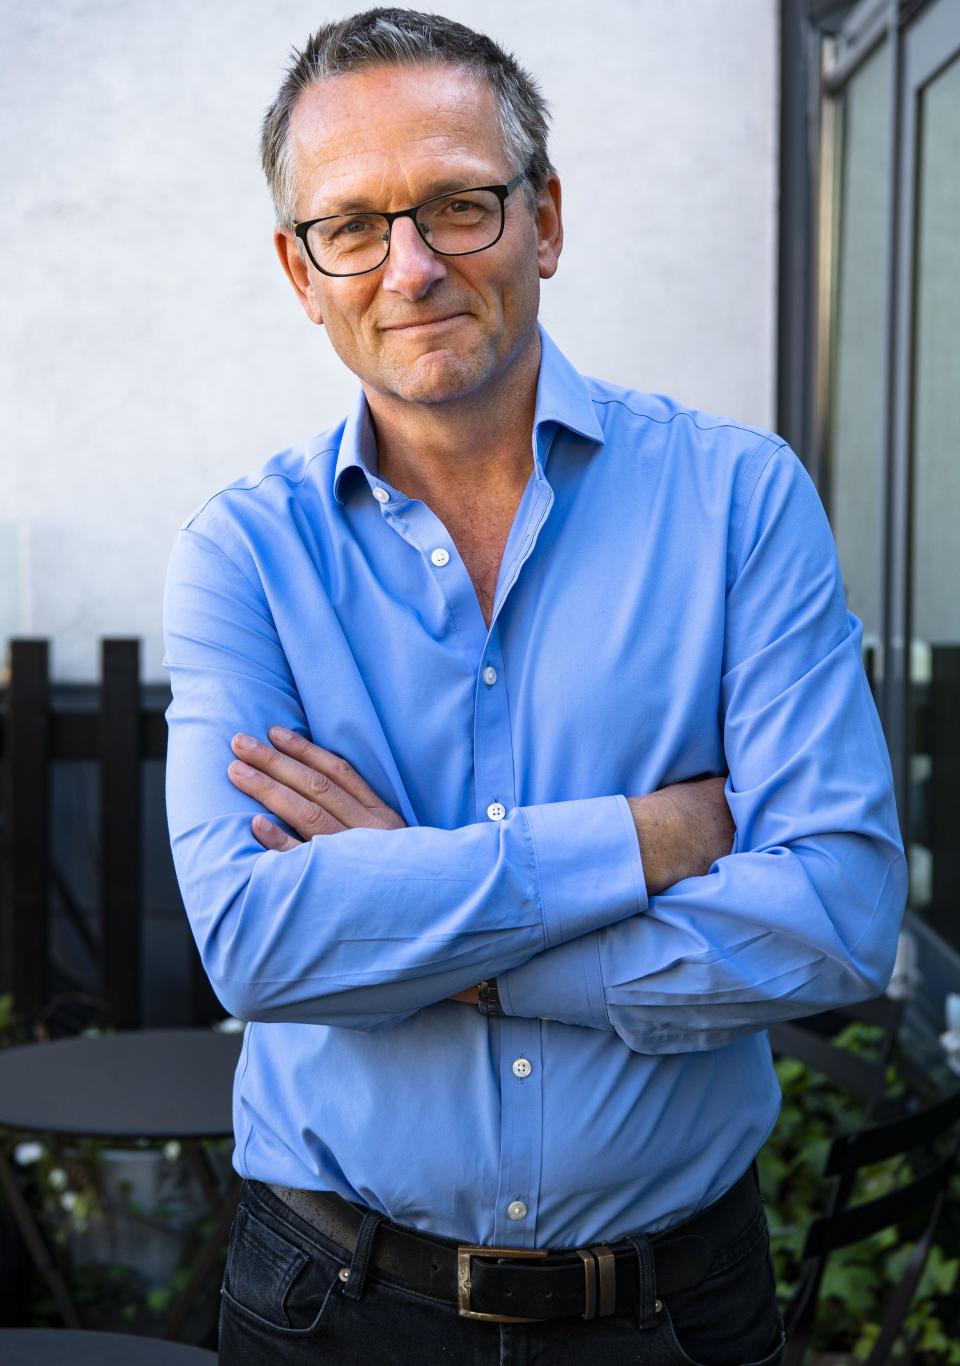 Dr Michael Mosley, pictured in 2019 in Sweden while promoting his book. (Alamy)